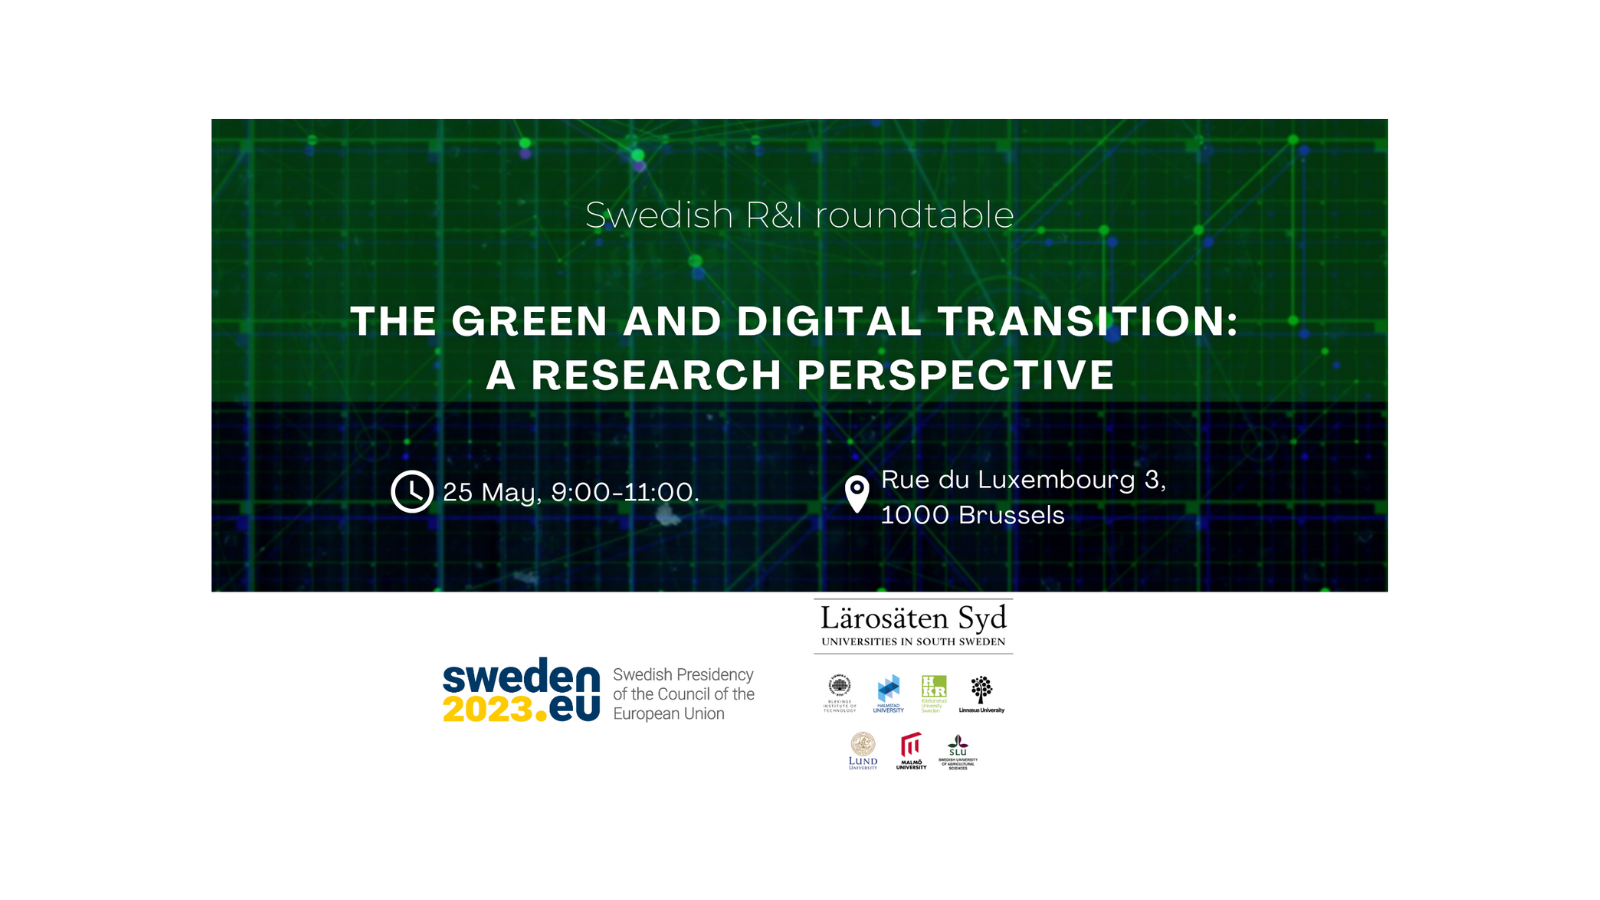 Text on a back group reading Swedish R&I roundtable THE GREEN AND DIGITAL TRANSITION: A RESEARCH PERSPECTIVE